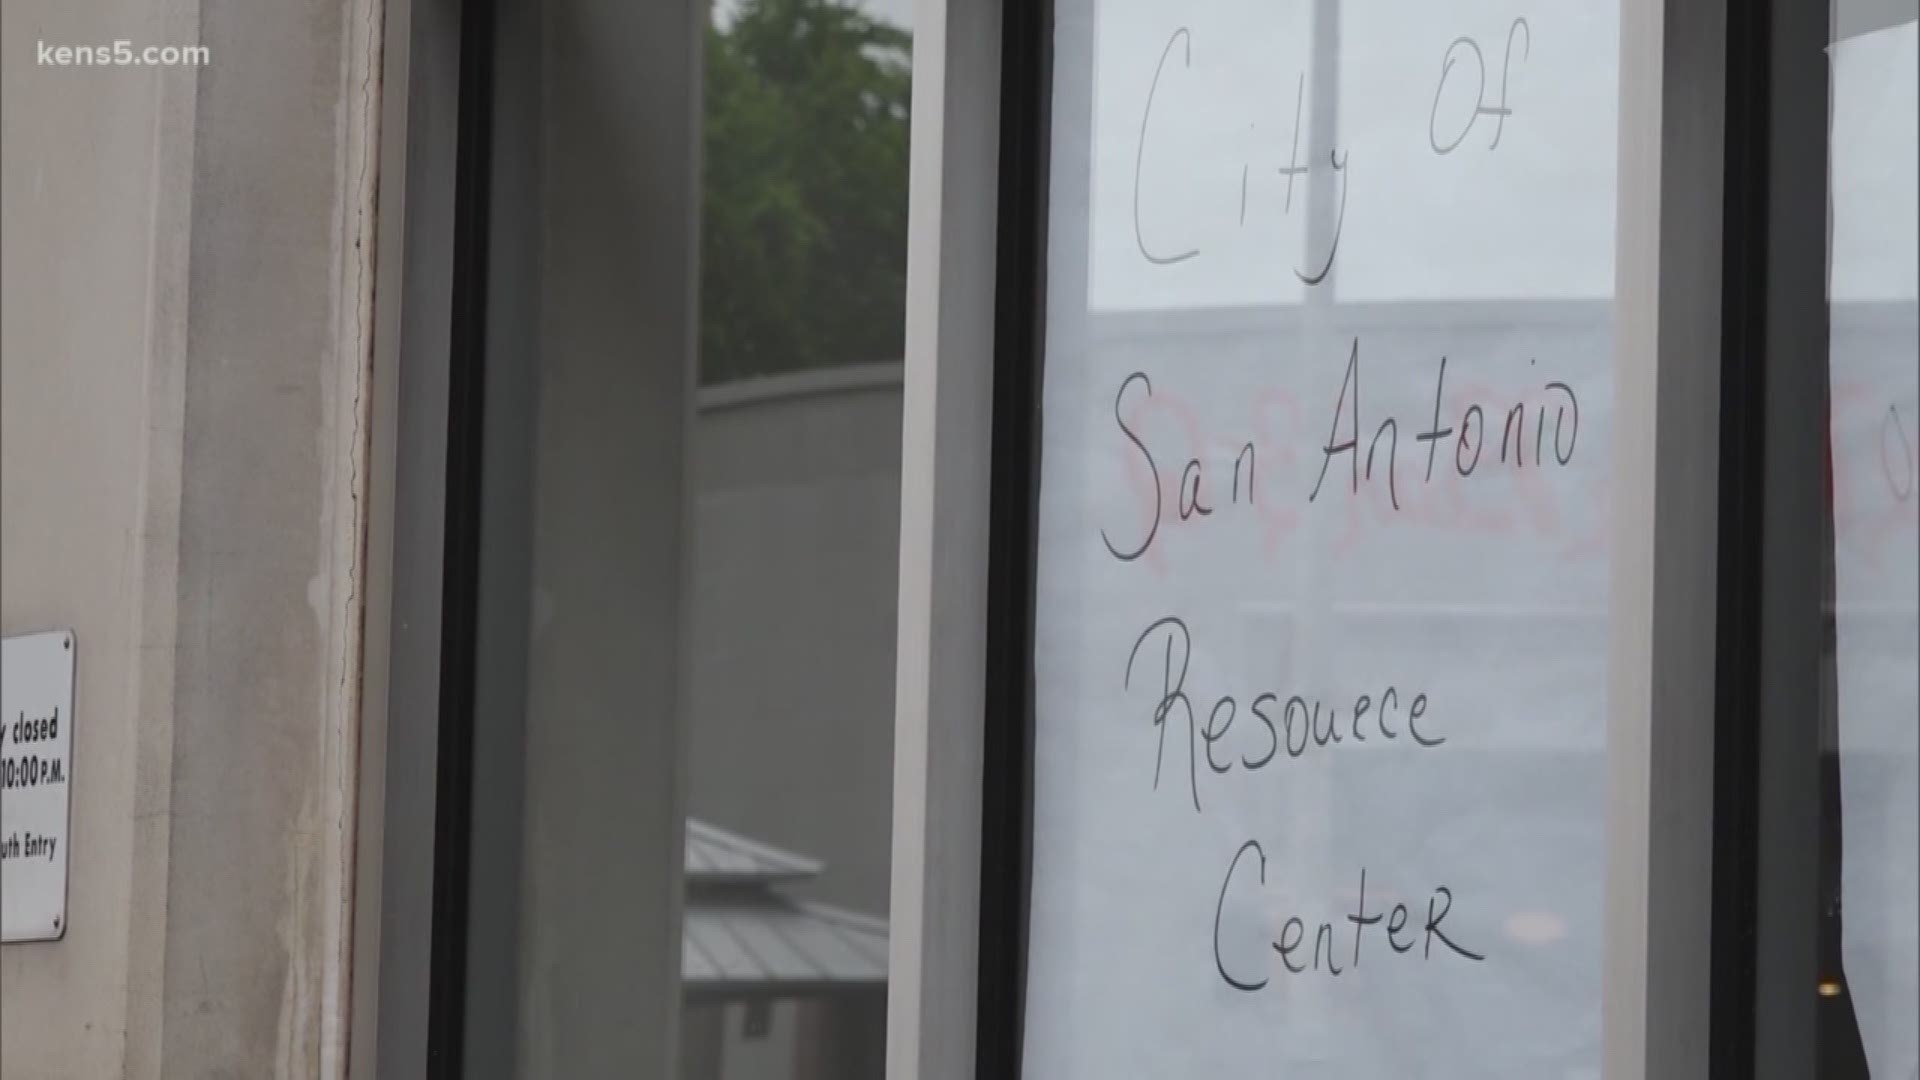 After several months of helping asylum-seeking migrants who have had been bussed to San Antonio, the center at Travis Park Church is closing.